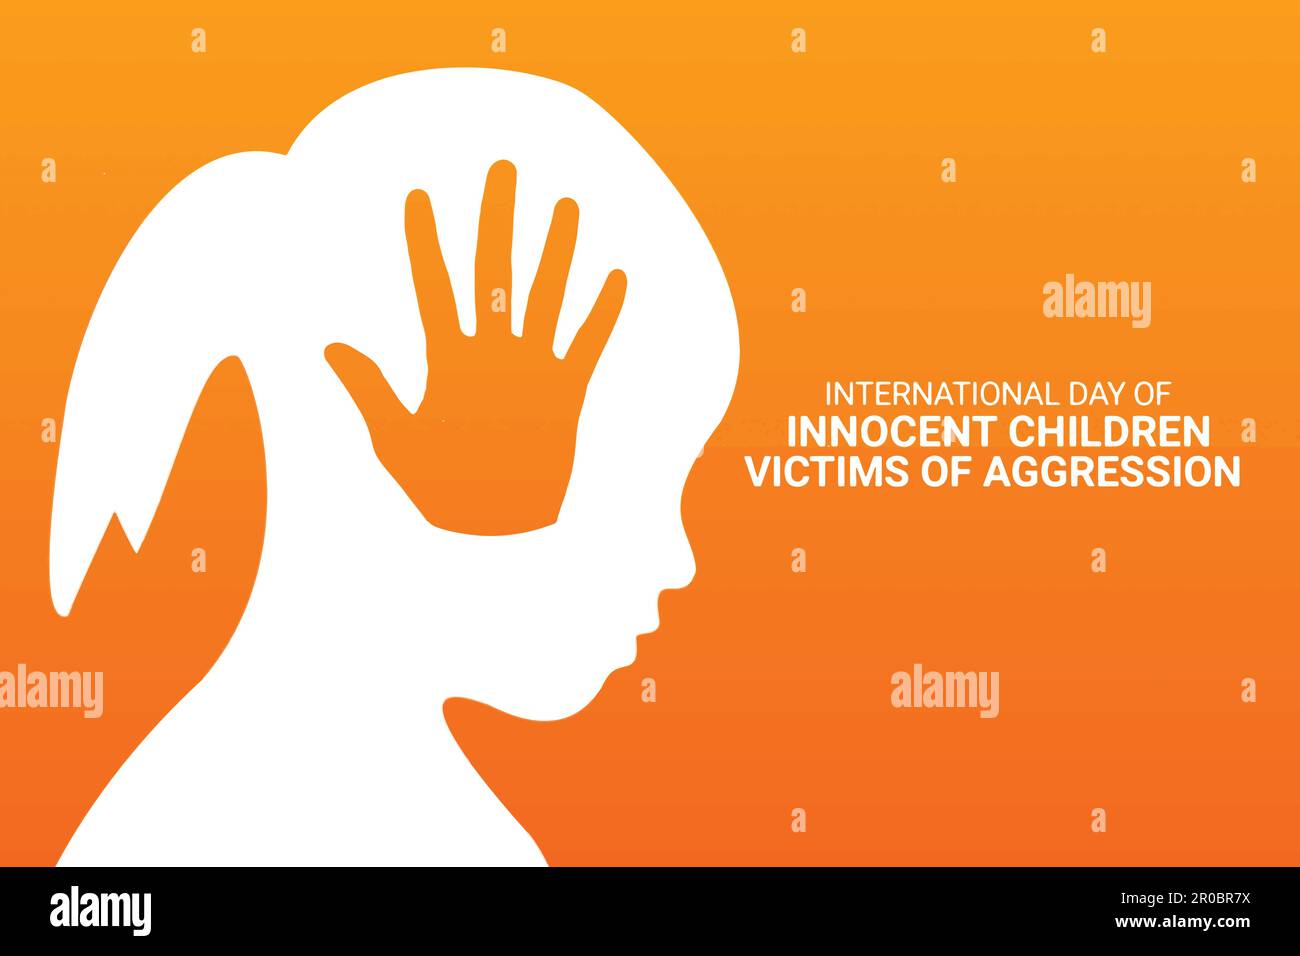 International Day Of Innocent Children Victims Of Aggression. Holiday concept. Template for background, banner, card, poster with text inscription Stock Vector